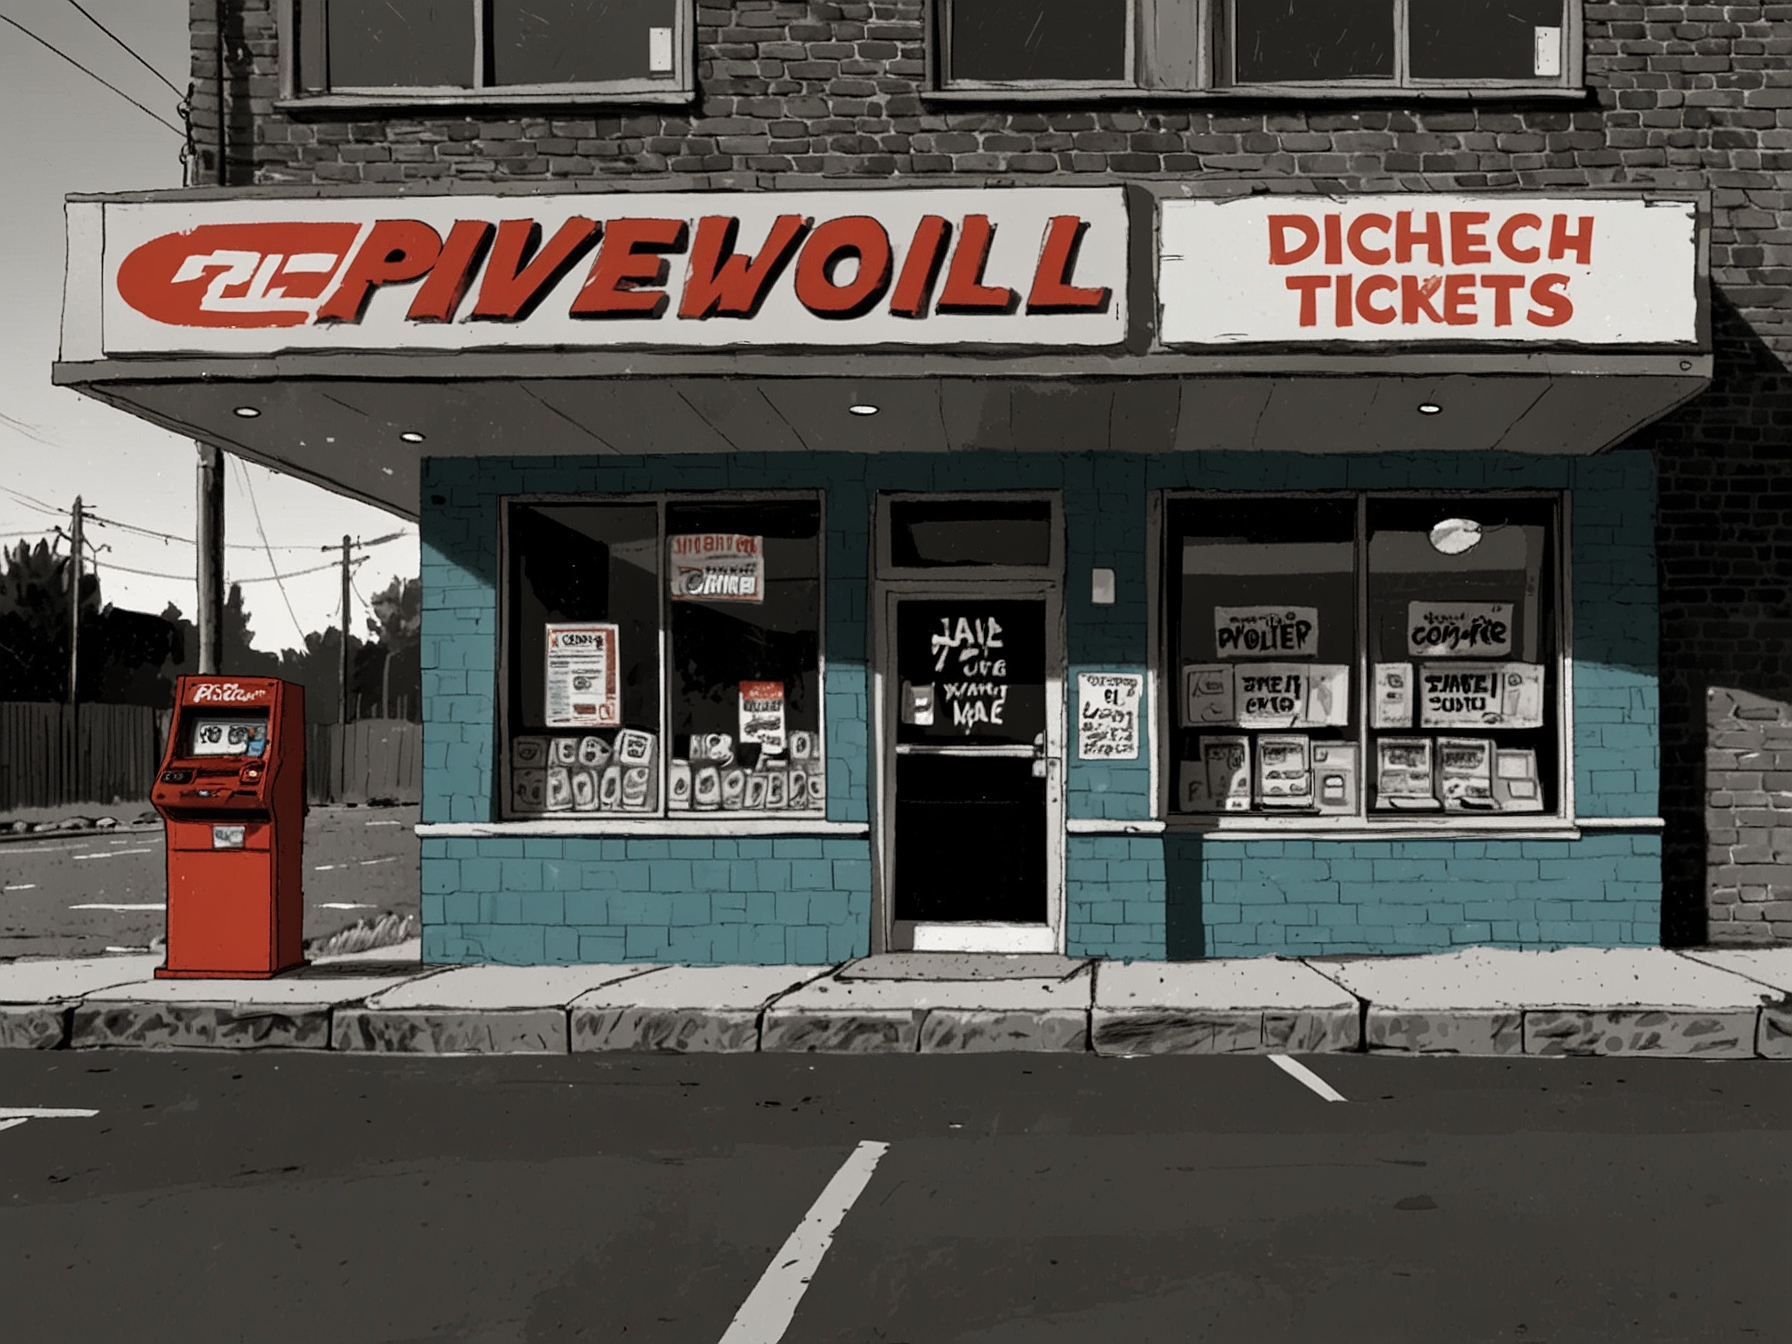 An image of a convenience store with a sign urging customers to check their Powerball tickets. This highlights the point of purchase where the winning tickets were bought.